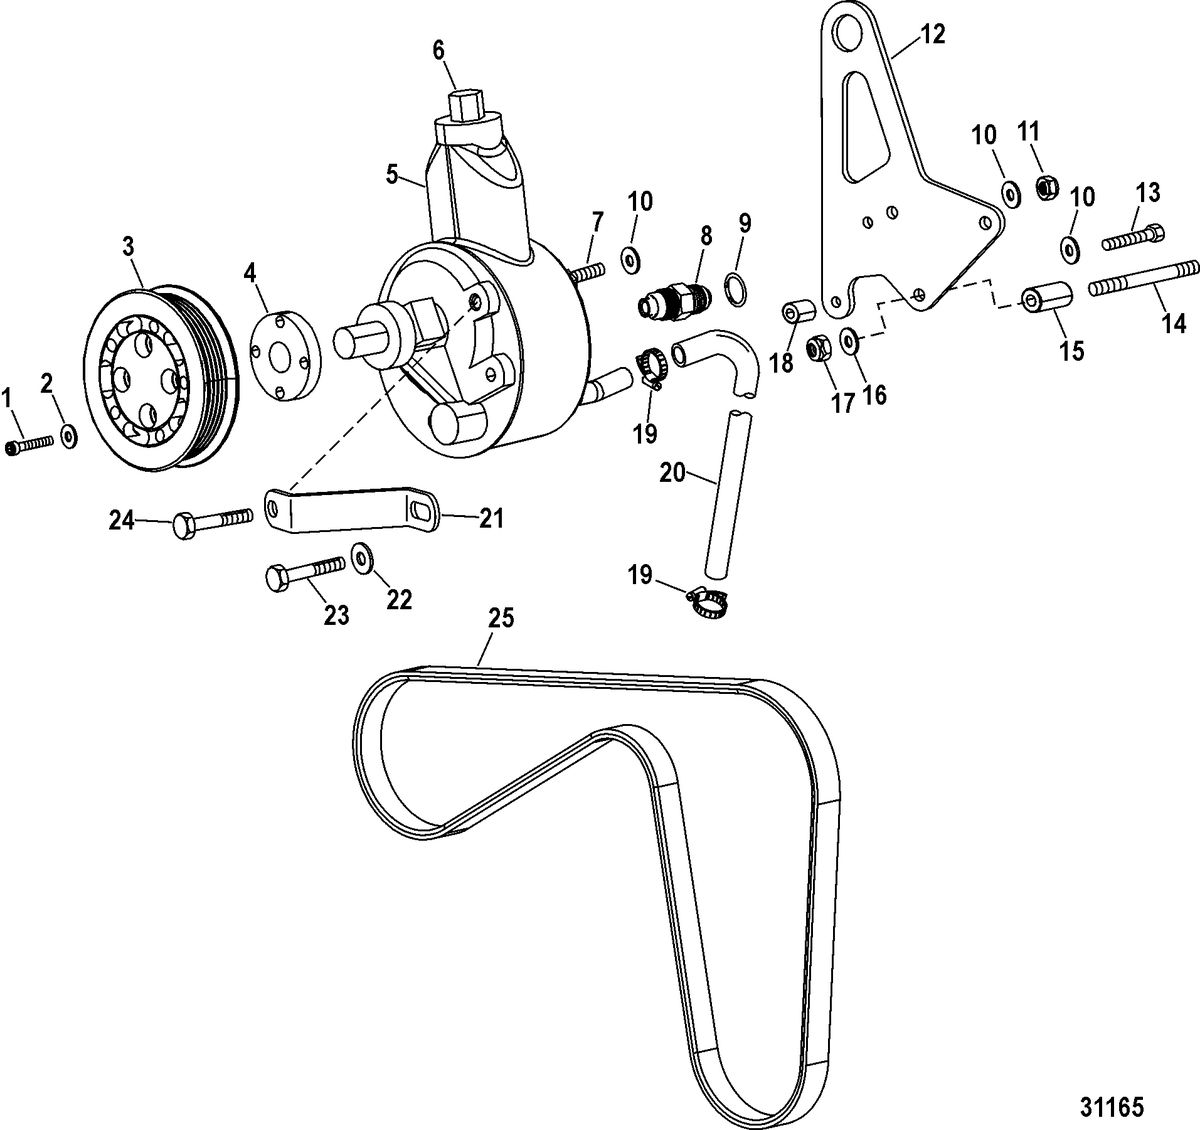 RACE STERNDRIVE 1075 SCI Power-Assisted Steering Components(Design III)